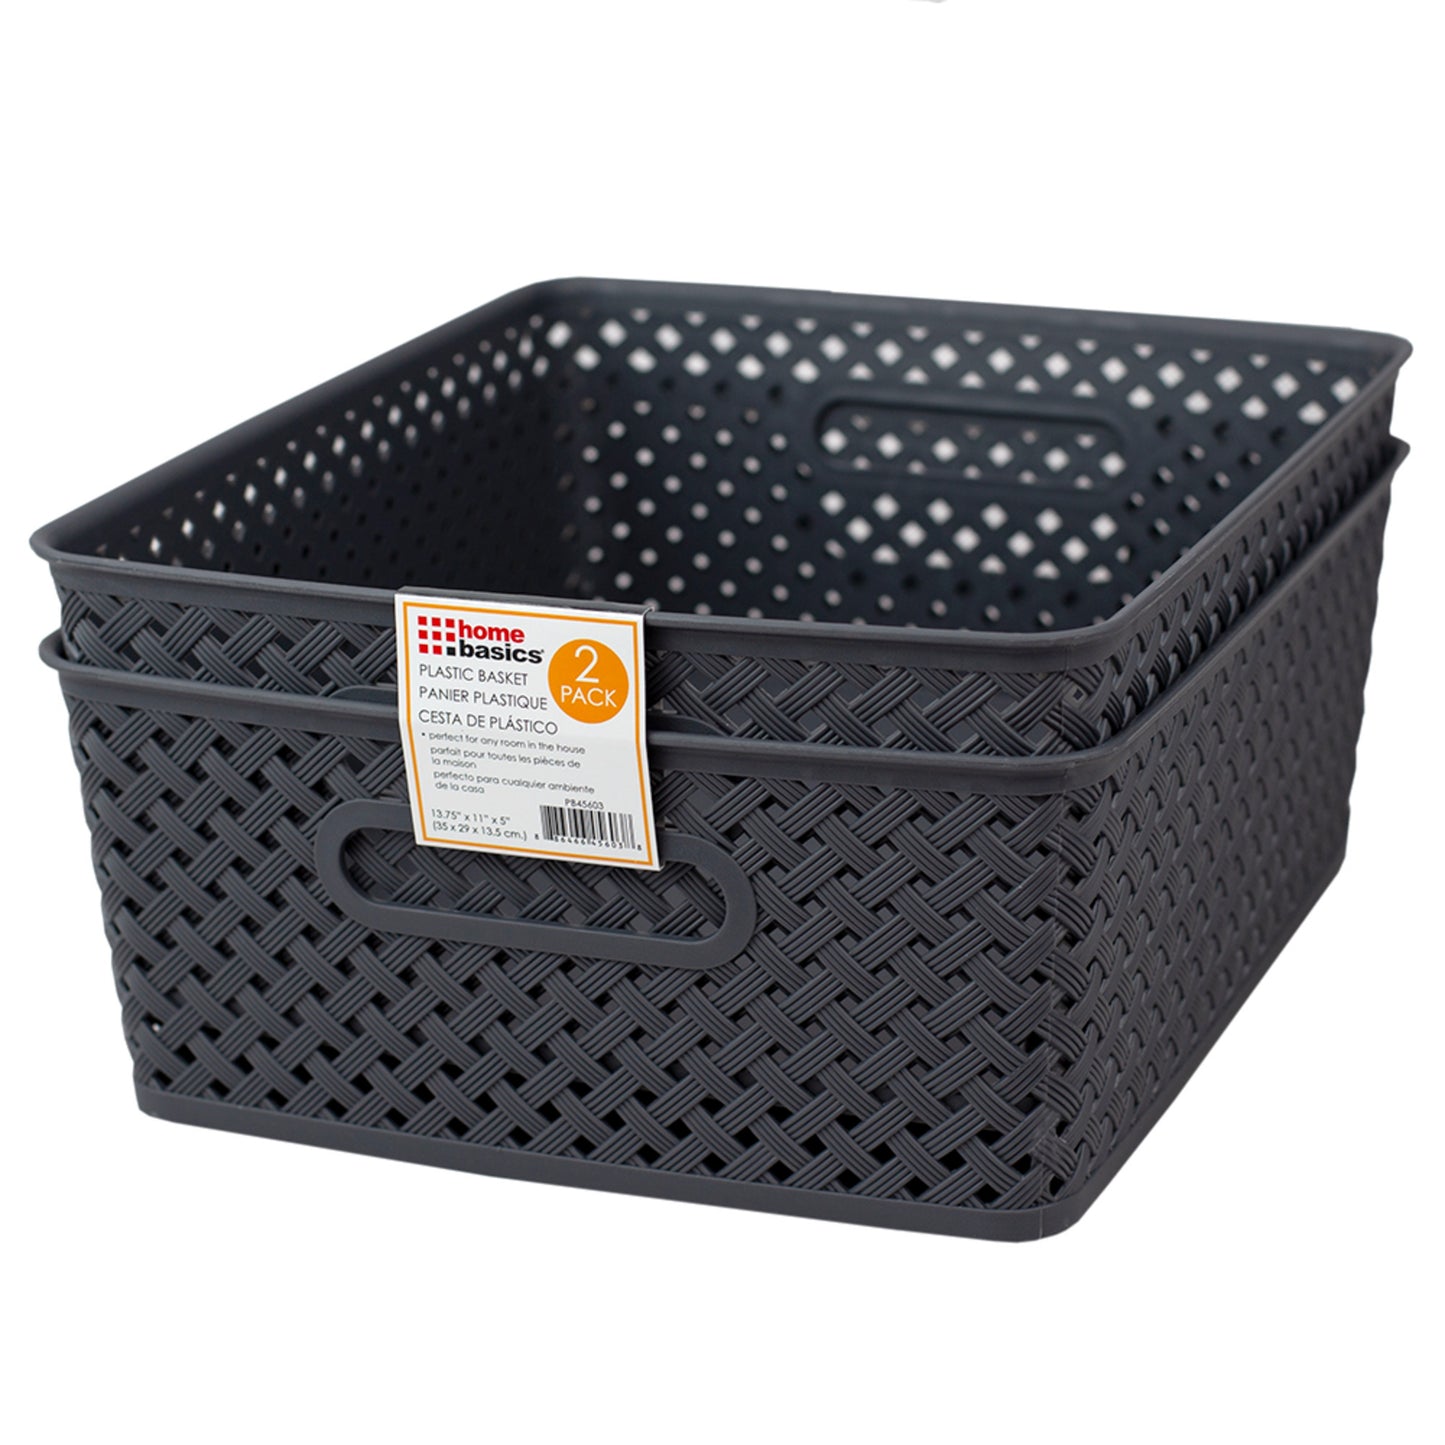 Home Basics Triple Woven 14"" x 11.5"" x 5.25"" Multi-Purpose Stackable Plastic Storage Basket, (Pack of 2), Grey - Grey